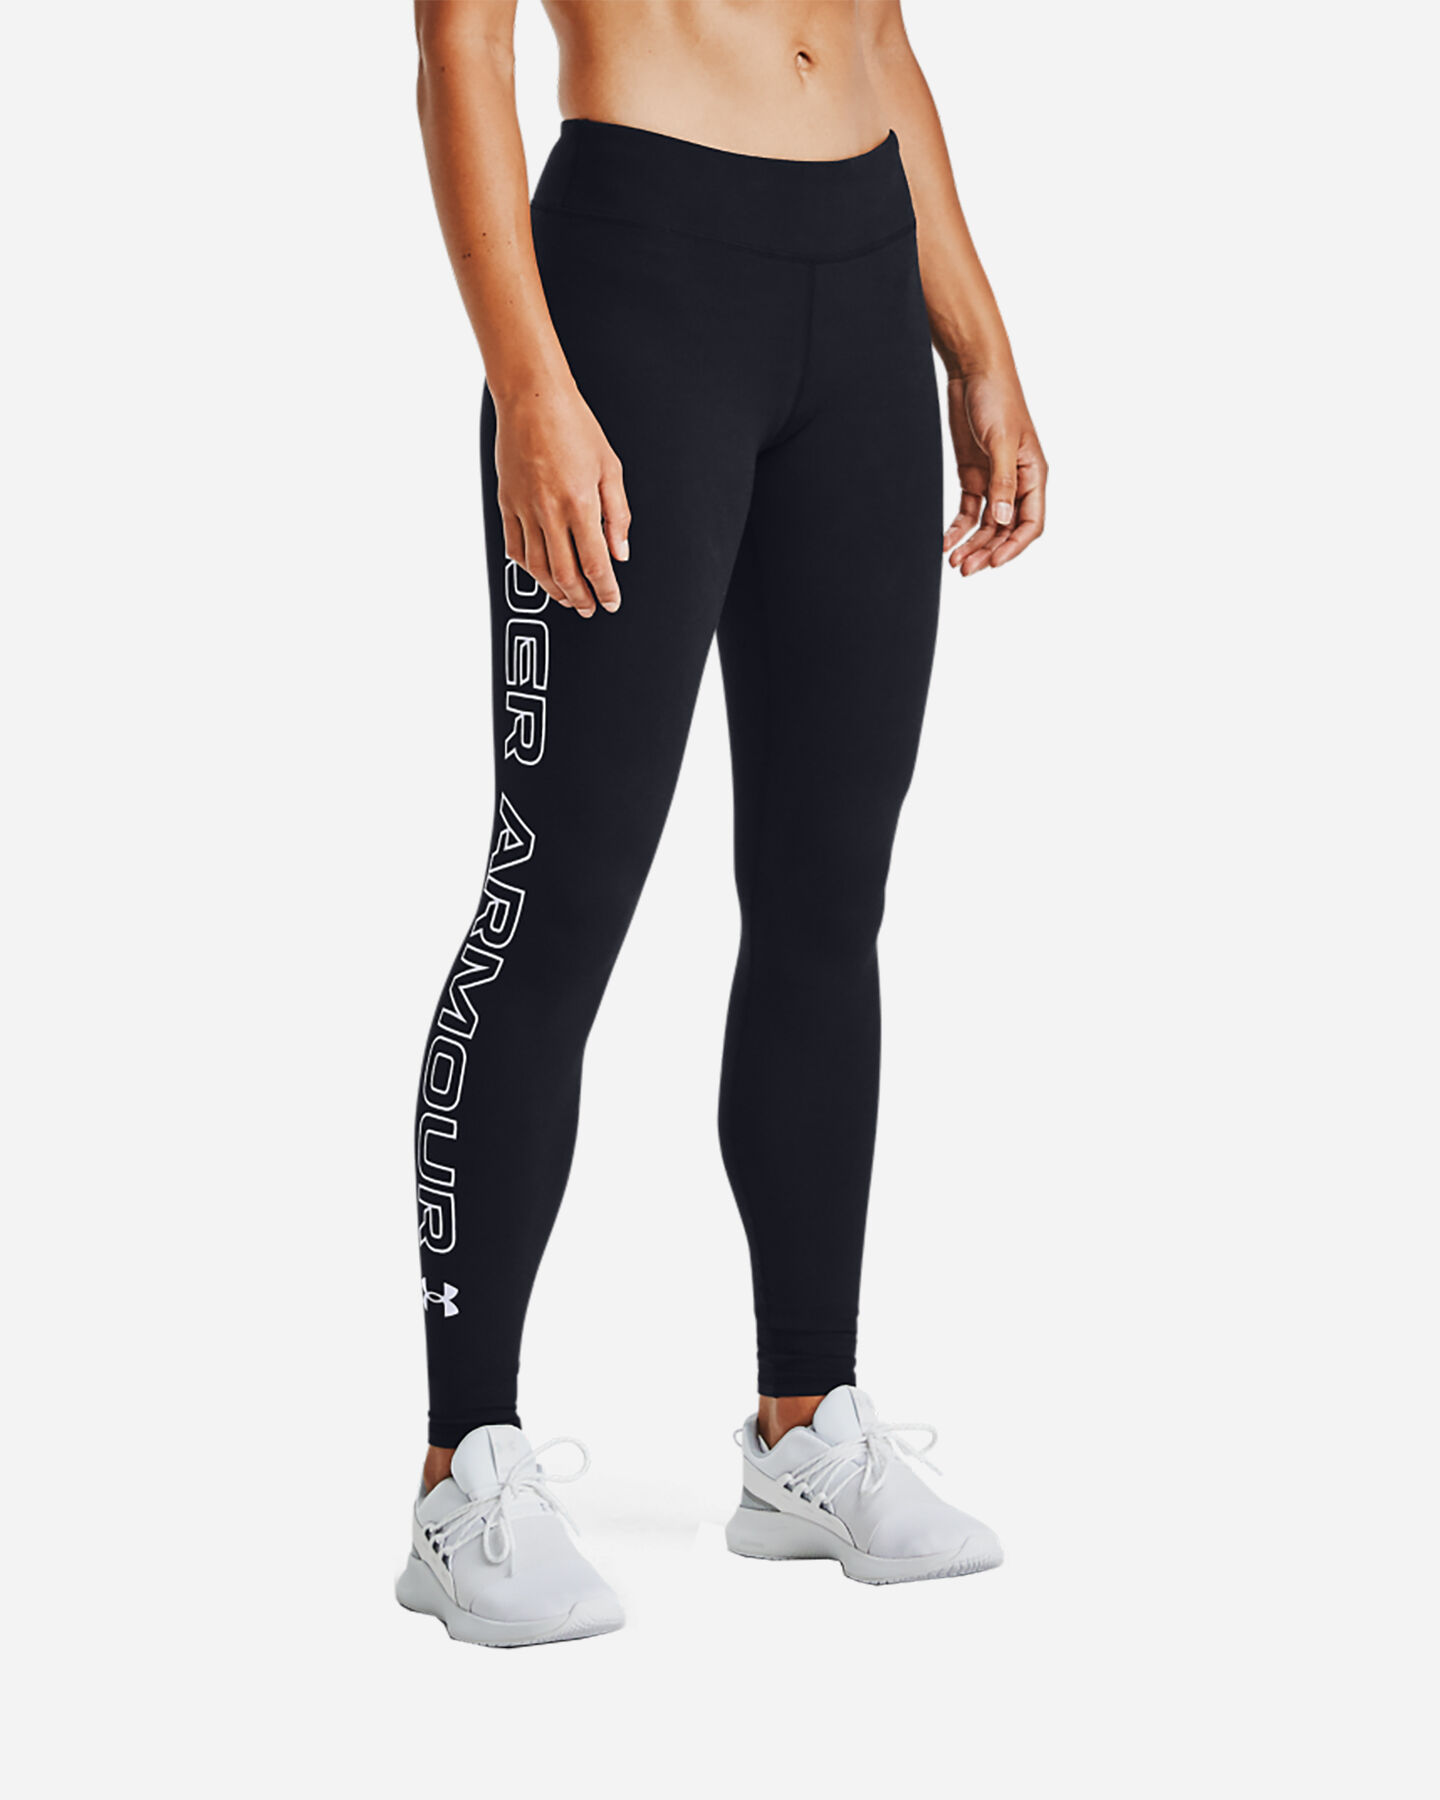  Leggings UNDER ARMOUR BIG LOGO LATERAL W S5229249 scatto 2